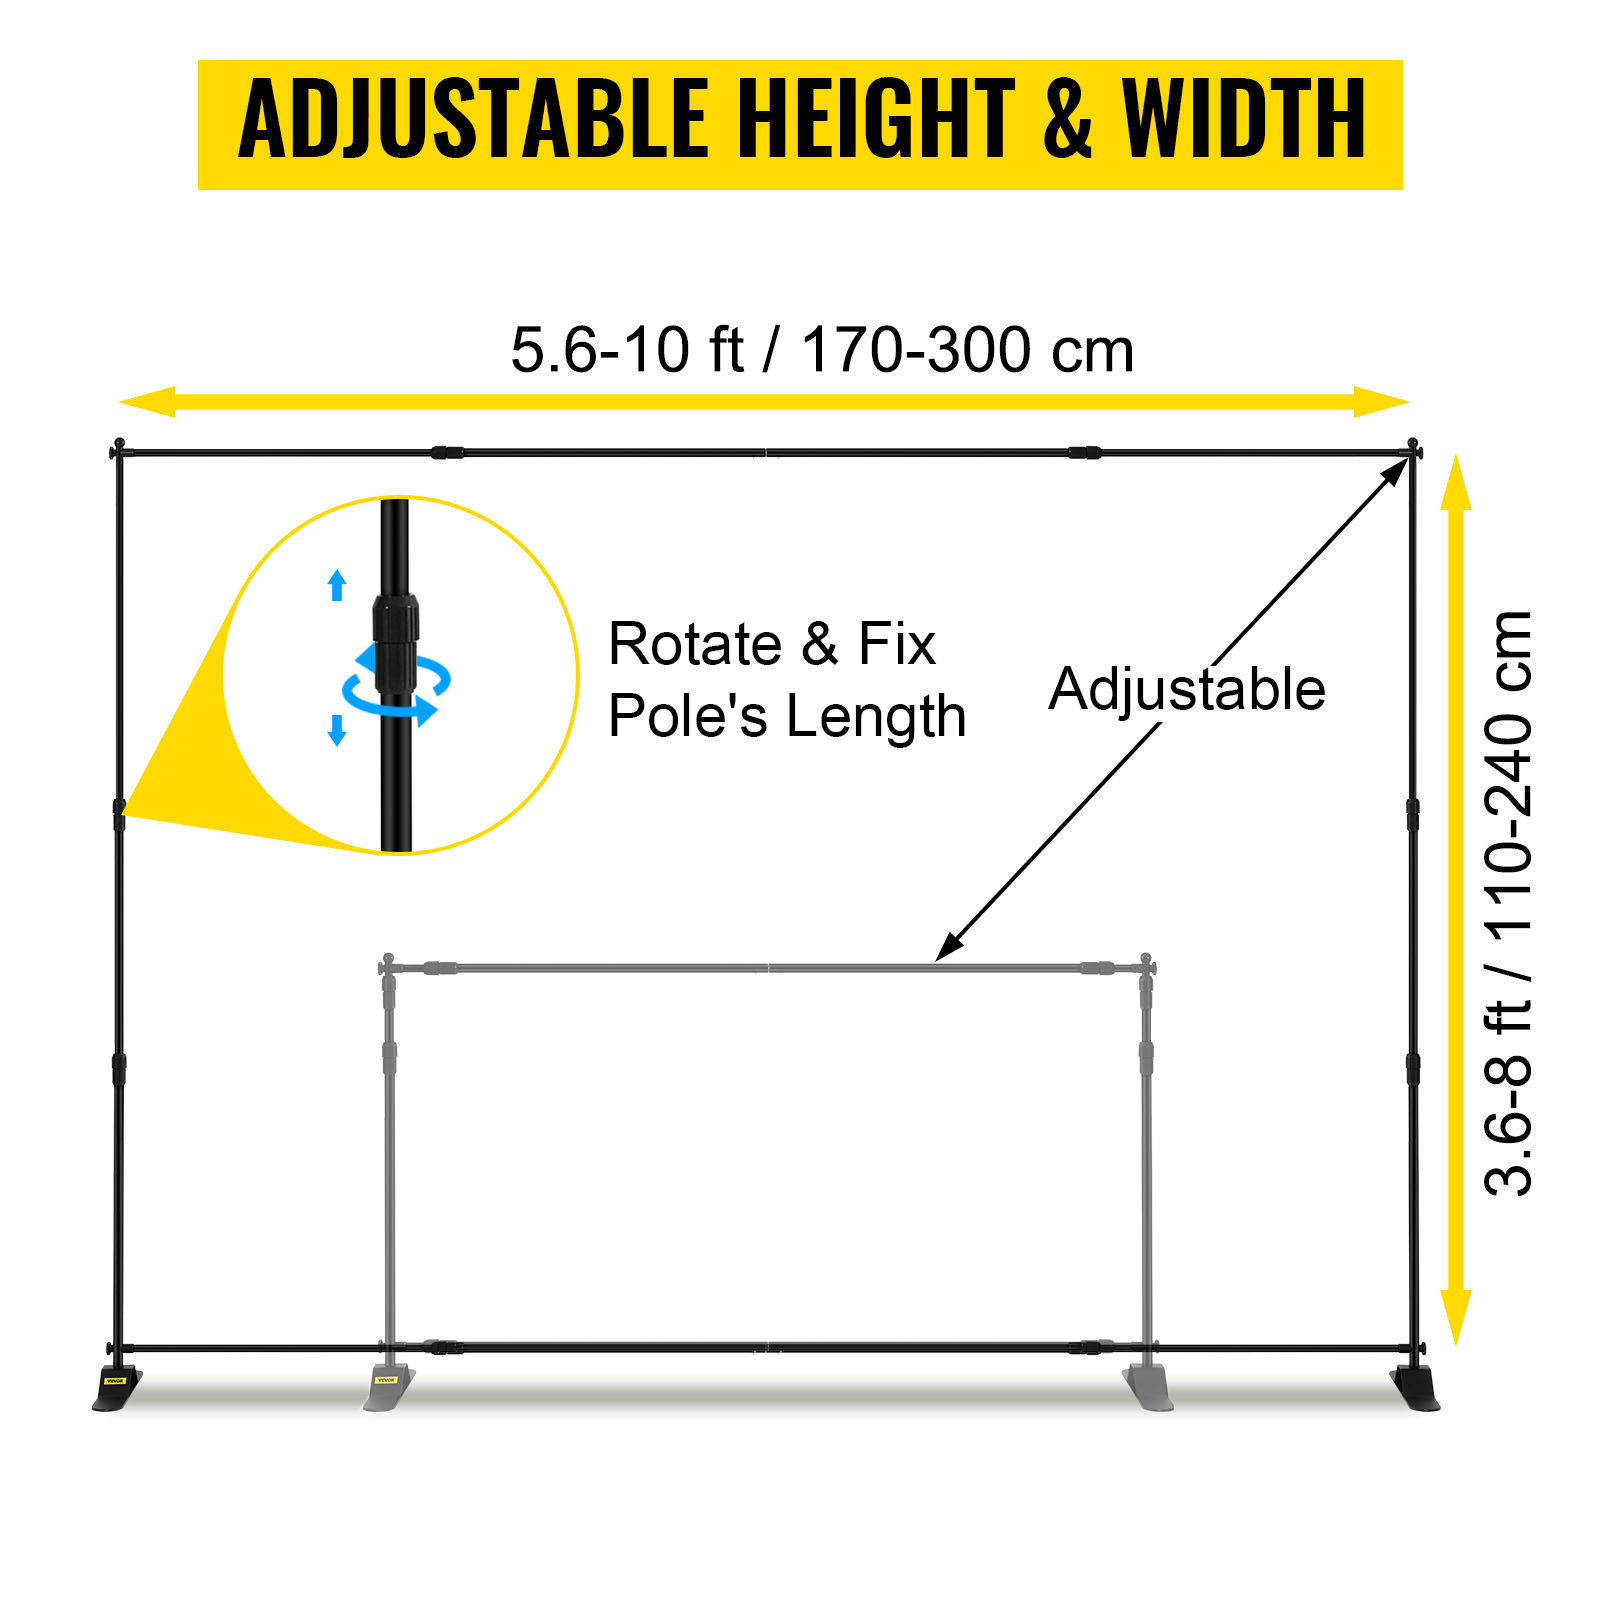 Photography Booth Photo Backdrop Banner Adjustable Stand 10 X 8 with Telescopic Poles for Trade Show Display Stand Carrying Case Free Step and Repeat Frame Stand 